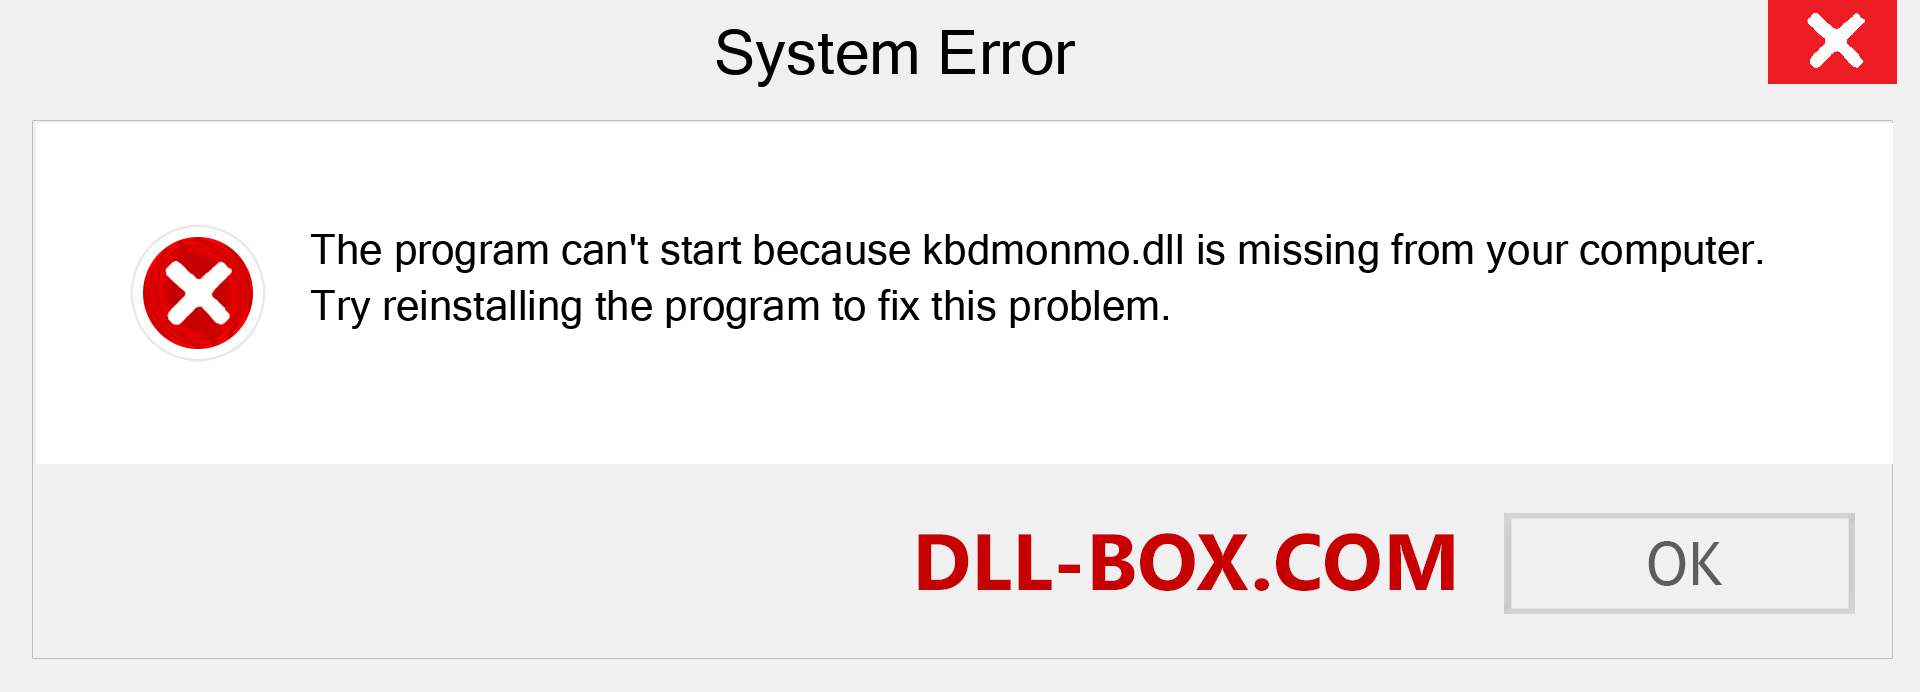  kbdmonmo.dll file is missing?. Download for Windows 7, 8, 10 - Fix  kbdmonmo dll Missing Error on Windows, photos, images